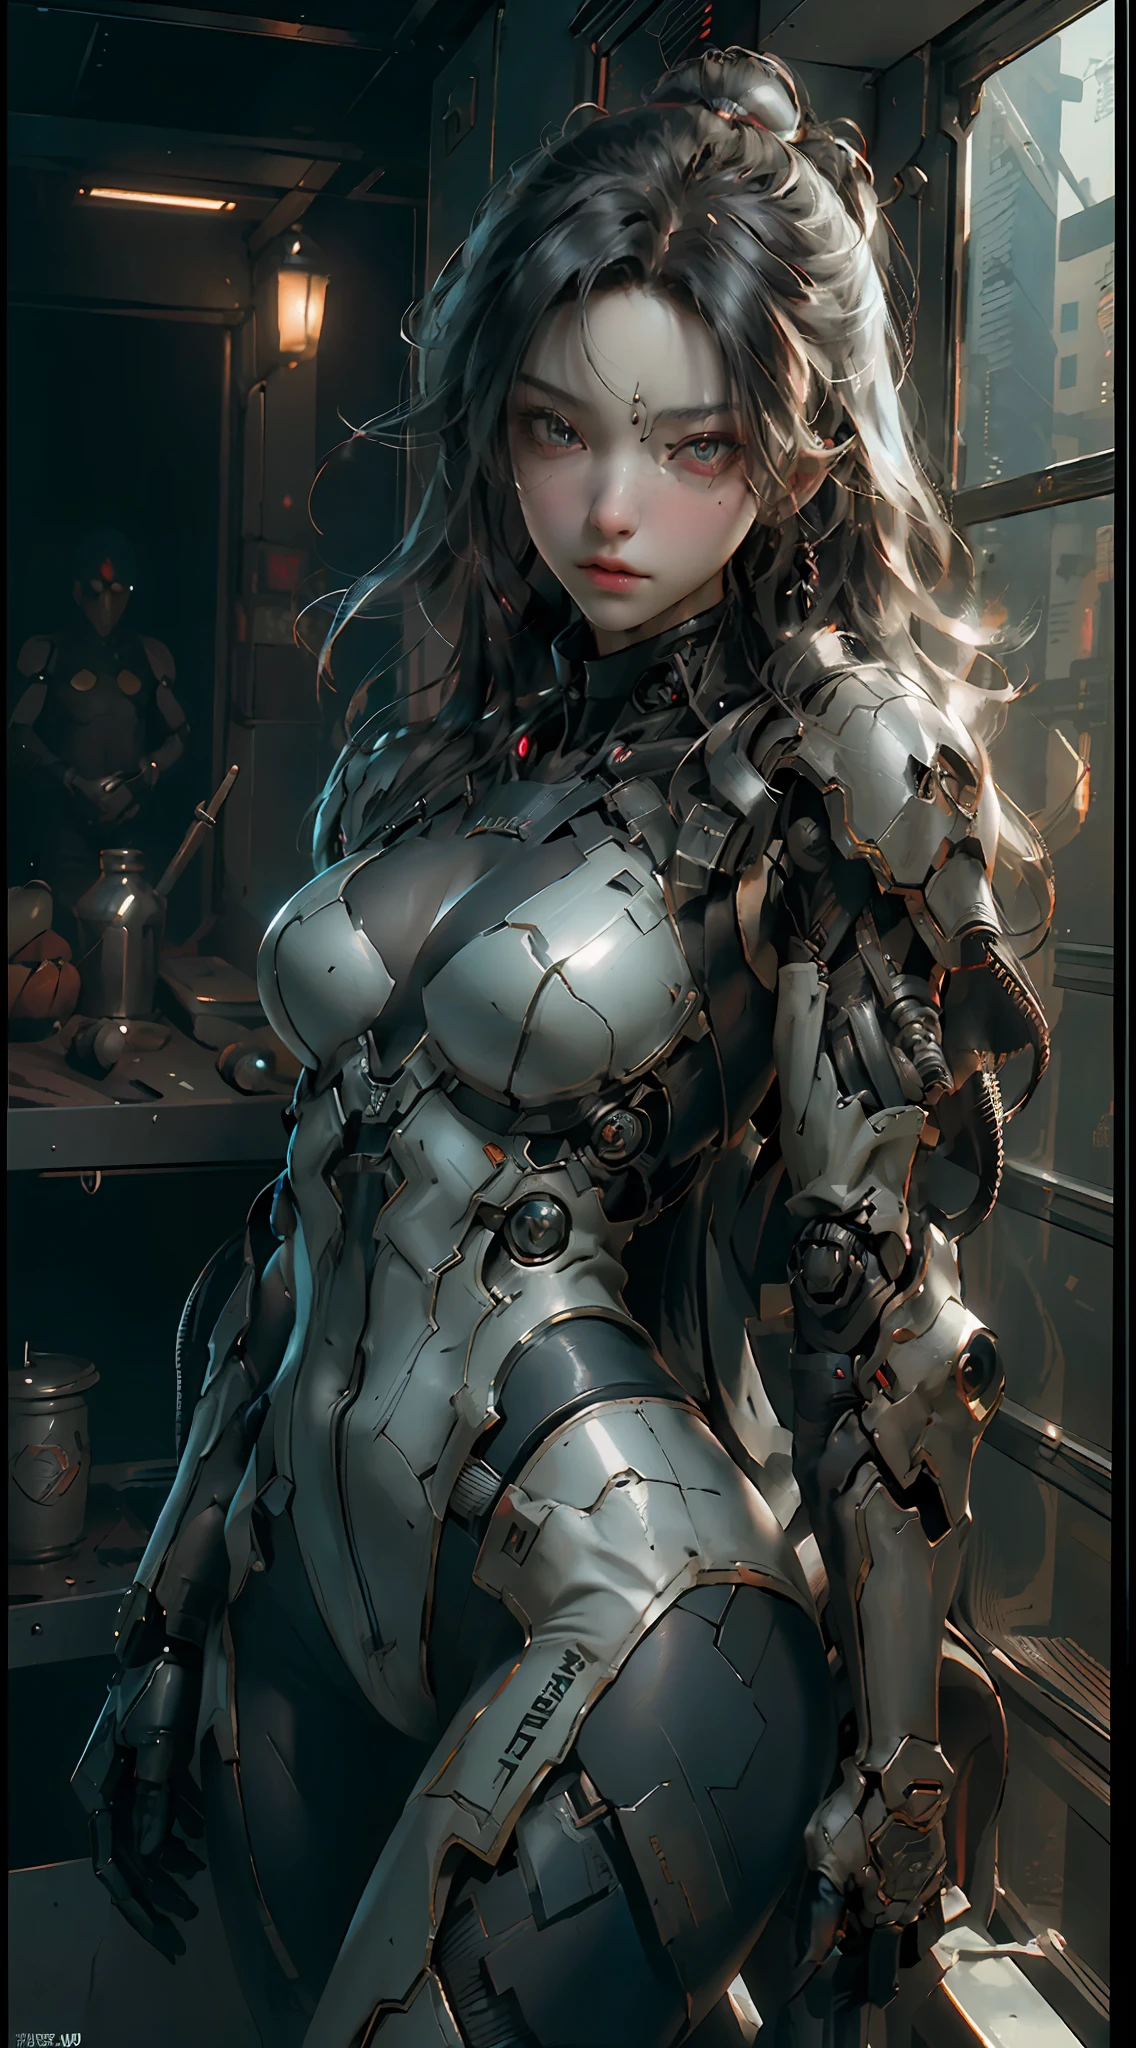 ((Best Quality)), ((Masterpiece)), (Details:1.4), 3D, Face and Chest Exposed Raw, Big, Close Up of Japan Woman Posing in Metal Suit, Biomechanical Rendered in SFM, Cyberpunk, Mecha Cyber Armor Girl, Cleavage Exposed Skin, Details Gundam, Detailed Neon, Fine Tube, Metal Cylinder, 8K High Quality Detail Art Metallic Armor, Fine and Detailed Armor, Realistic Shading Perfect Body, Photorealistic Perfect Body, Highly Detailed ArtGerm, 3D Rendering Character Art 8K, Super Detail Rendering Beautiful Cyberpunk Woman Image, HDR (High Dynamic Range),Ray Tracing,NVIDIA RTX, Super Resolution, Unreal 5, Subsurface Scattering, PBR Texturing, Post-Processing, Anisotropic Filtering, Depth of Field, Maximum Clarity and Sharpness, Multilayer Textures, Albedo and Specular Maps, Surface Shading, Accurate Simulation of Light-Material Interactions, Perfect Proportions, Octane Rendering,Two-tone lighting,Wide aperture,Low ISO,White balance,Rule of thirds,8K RAW,